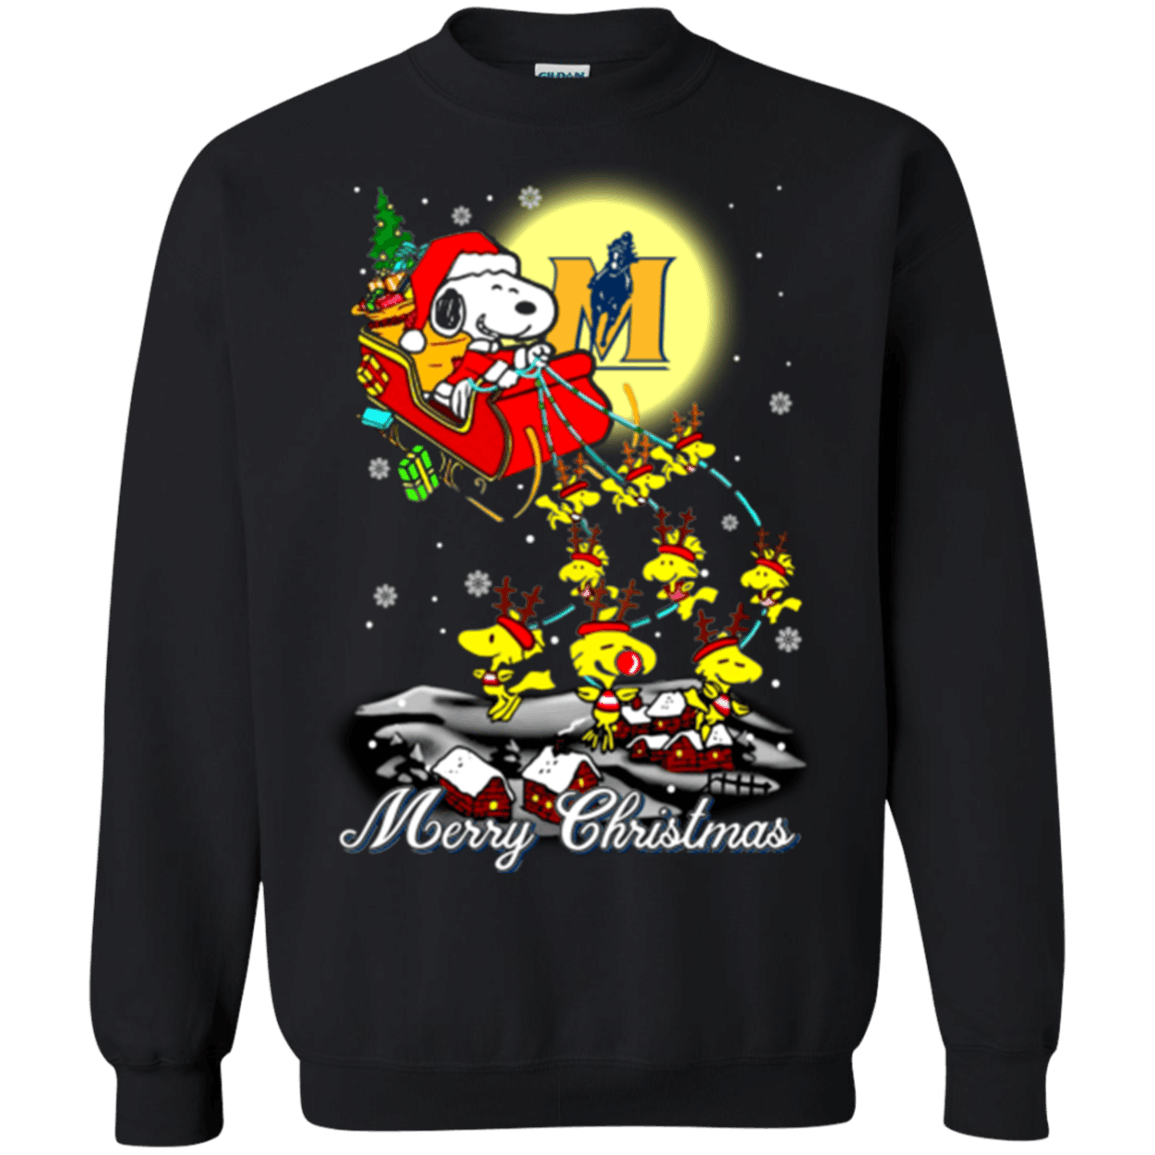 Blithesome Murray State Racers Ugly Christmas Sweater 2023S Santa Claus With Sleigh And Snoopy Sweatshirts